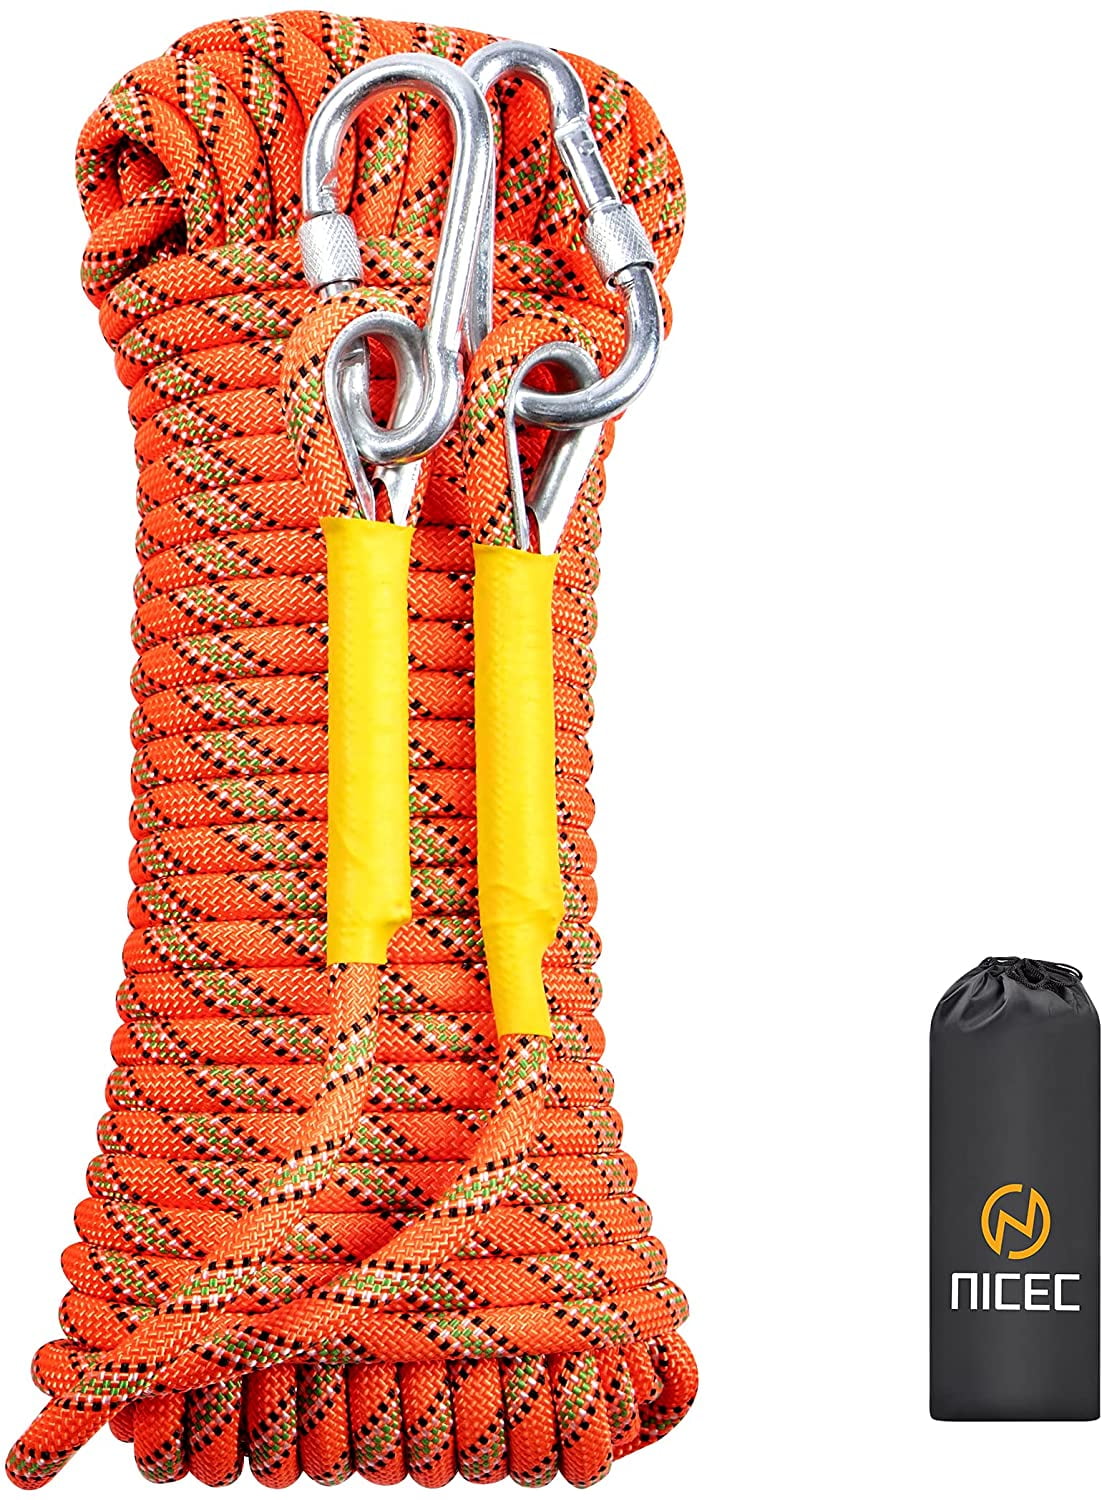 Nice C Climbing Rope, Dynamic Rock-Climbing Rope, Escape Rope Climbing  Equipment 32ft/64ft/96ft/160ft/230ft/500ft/985ft/1000ft with Carry Bag  Rescue